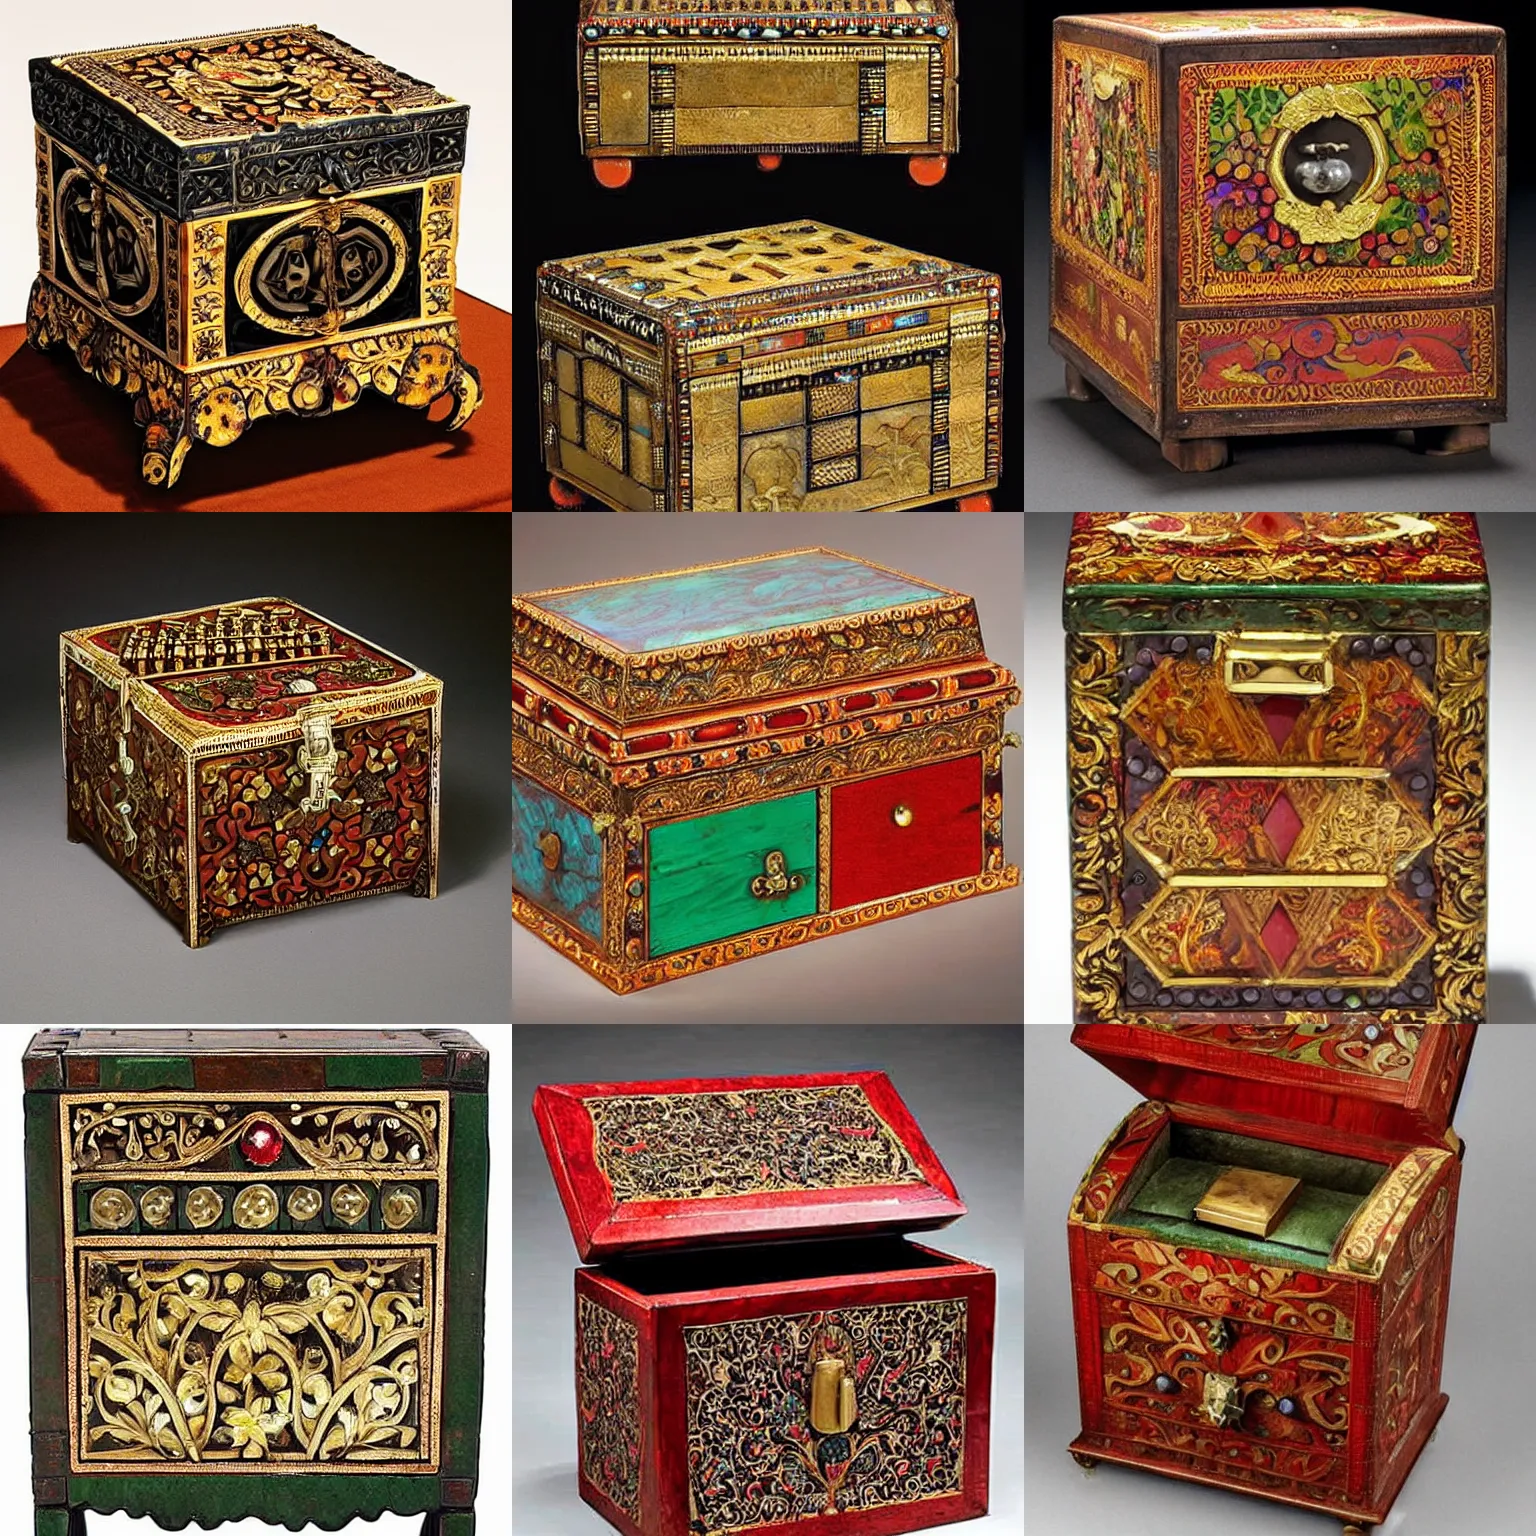 Prompt: An abracadabrus is an ornate, gemstone-studded wooden chest that weighs 25 pounds while empty. Its interior compartment is a cube measuring 1½ feet on a side.